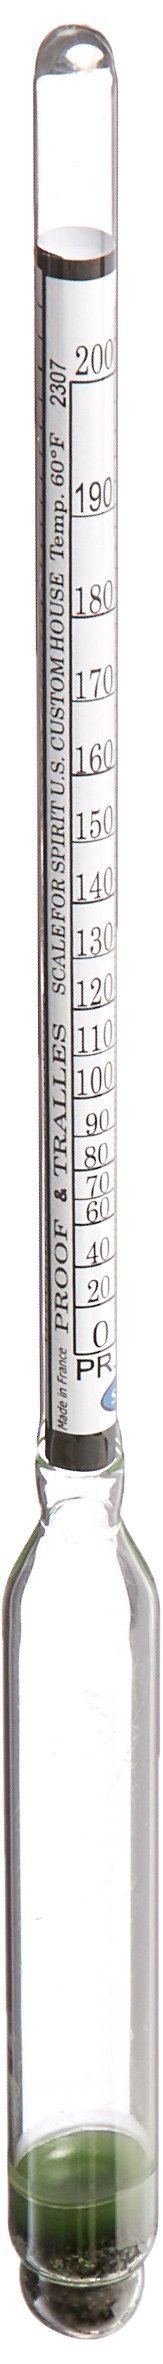 cnsdistributing 6809 Proof and Tralle or % Alcohol Hydrometer Alcoholmeter Spiritometer for Moonshine Still, Spirits, Distilled,Clear Clear - LeoForward Australia